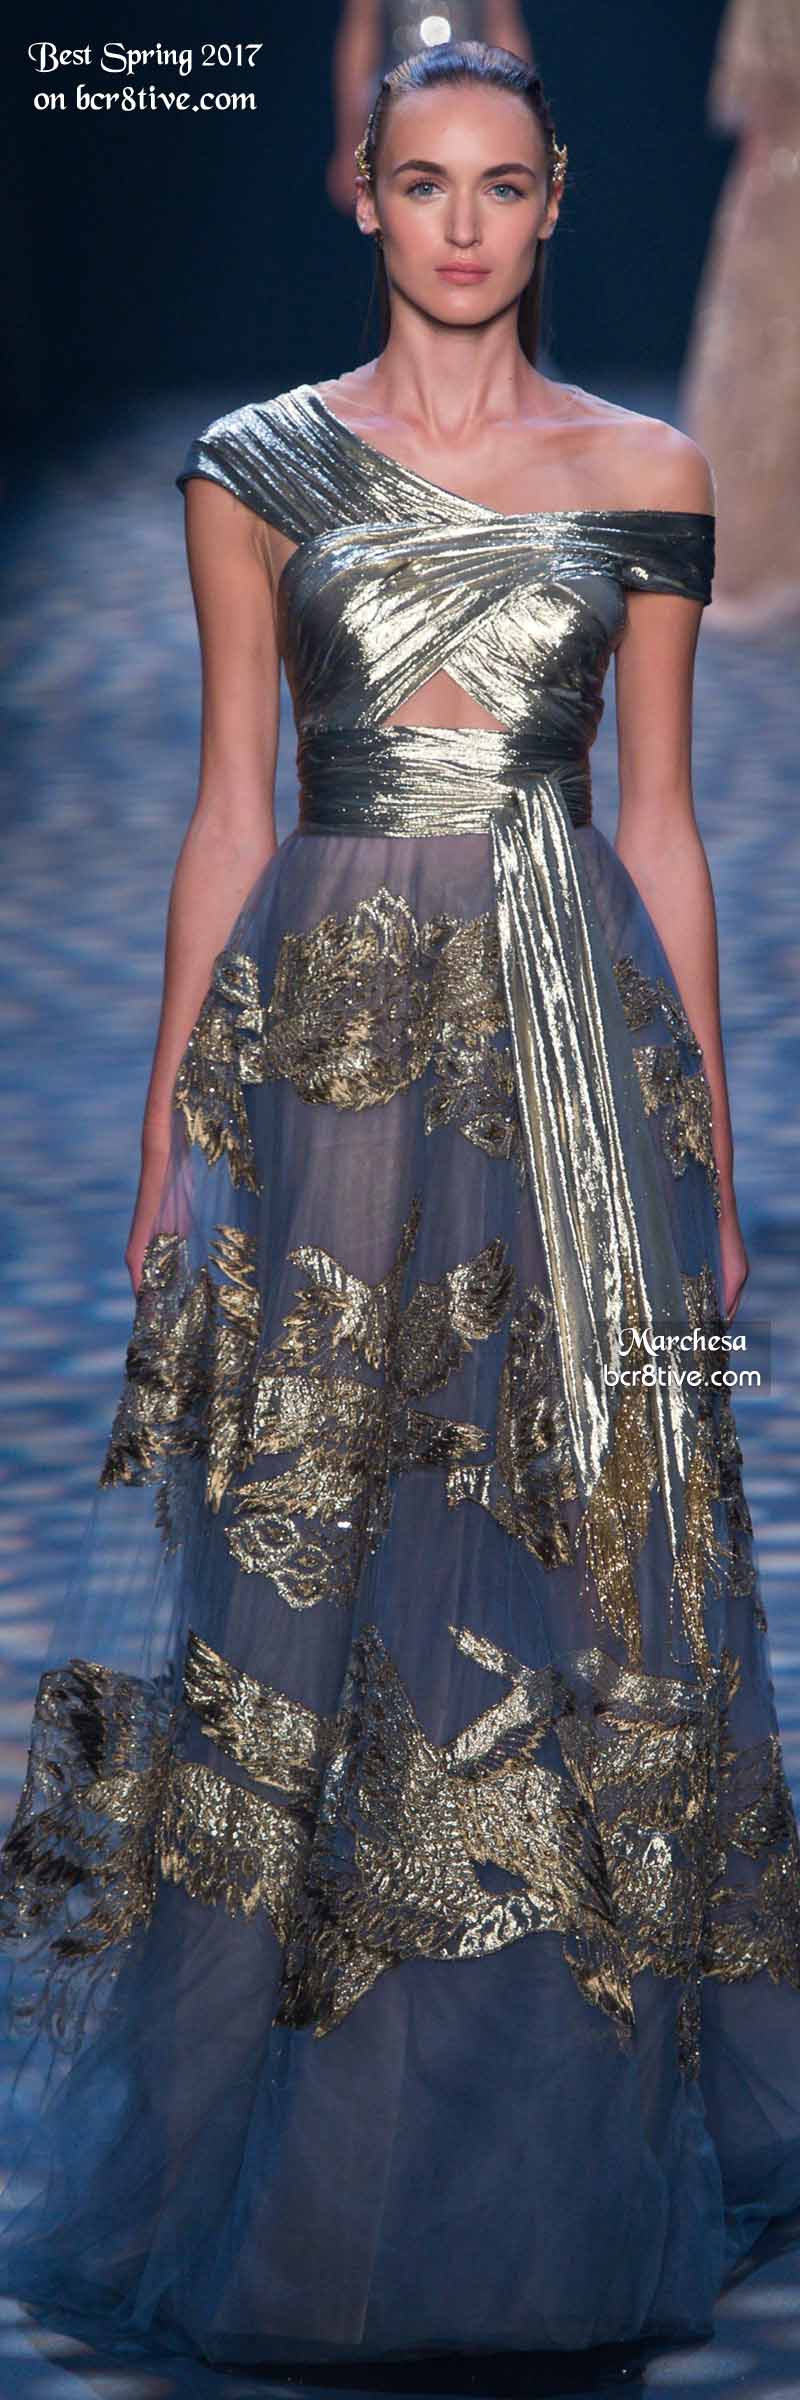 Marchesa - The Best Looks from New York Fashion Week Spring 2017